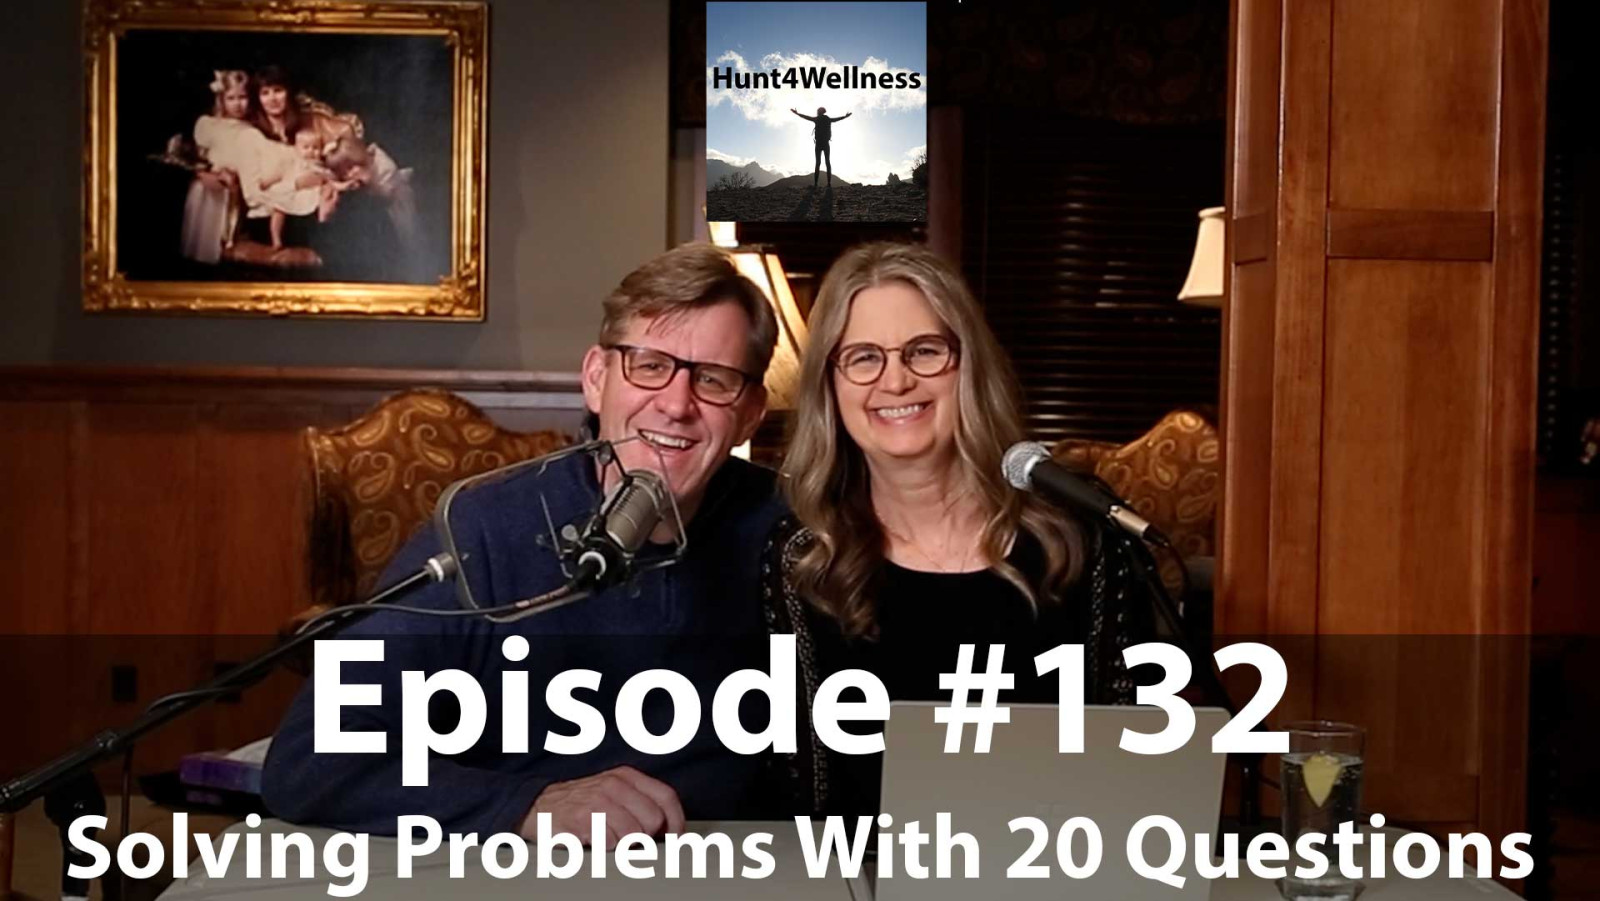 Episode #132 - Solving Problems With 20 Questions